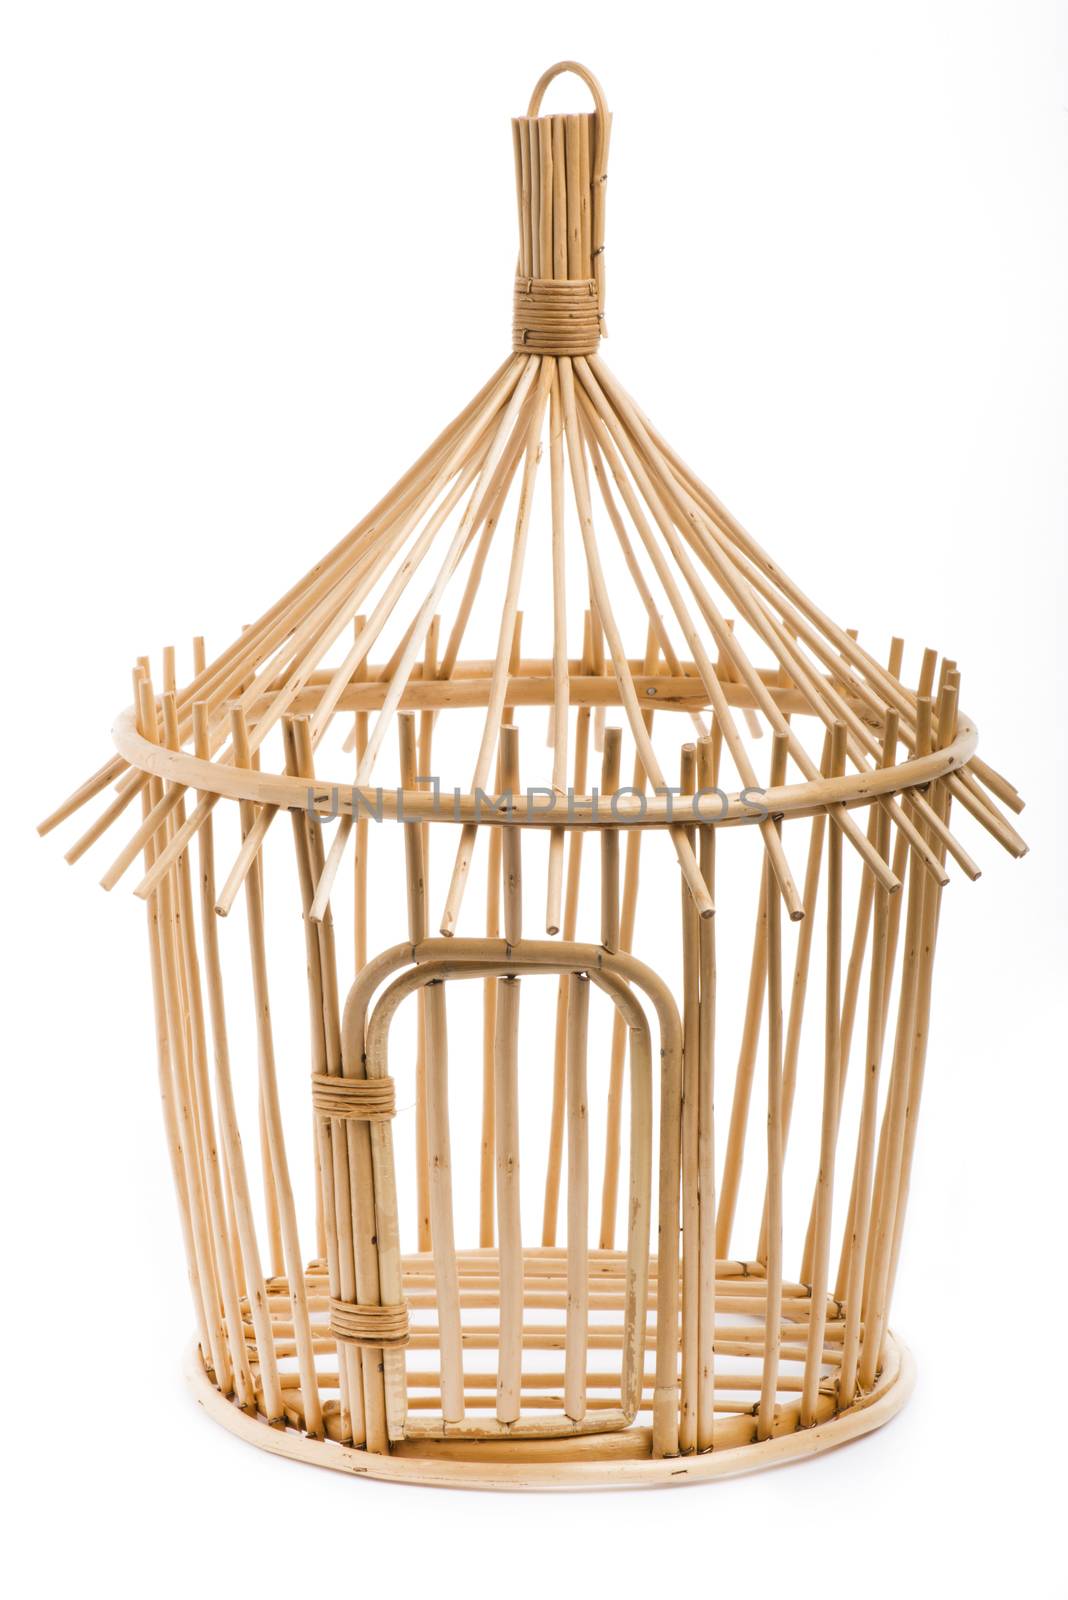 Light wooden bird cage on white background by marius_dragne